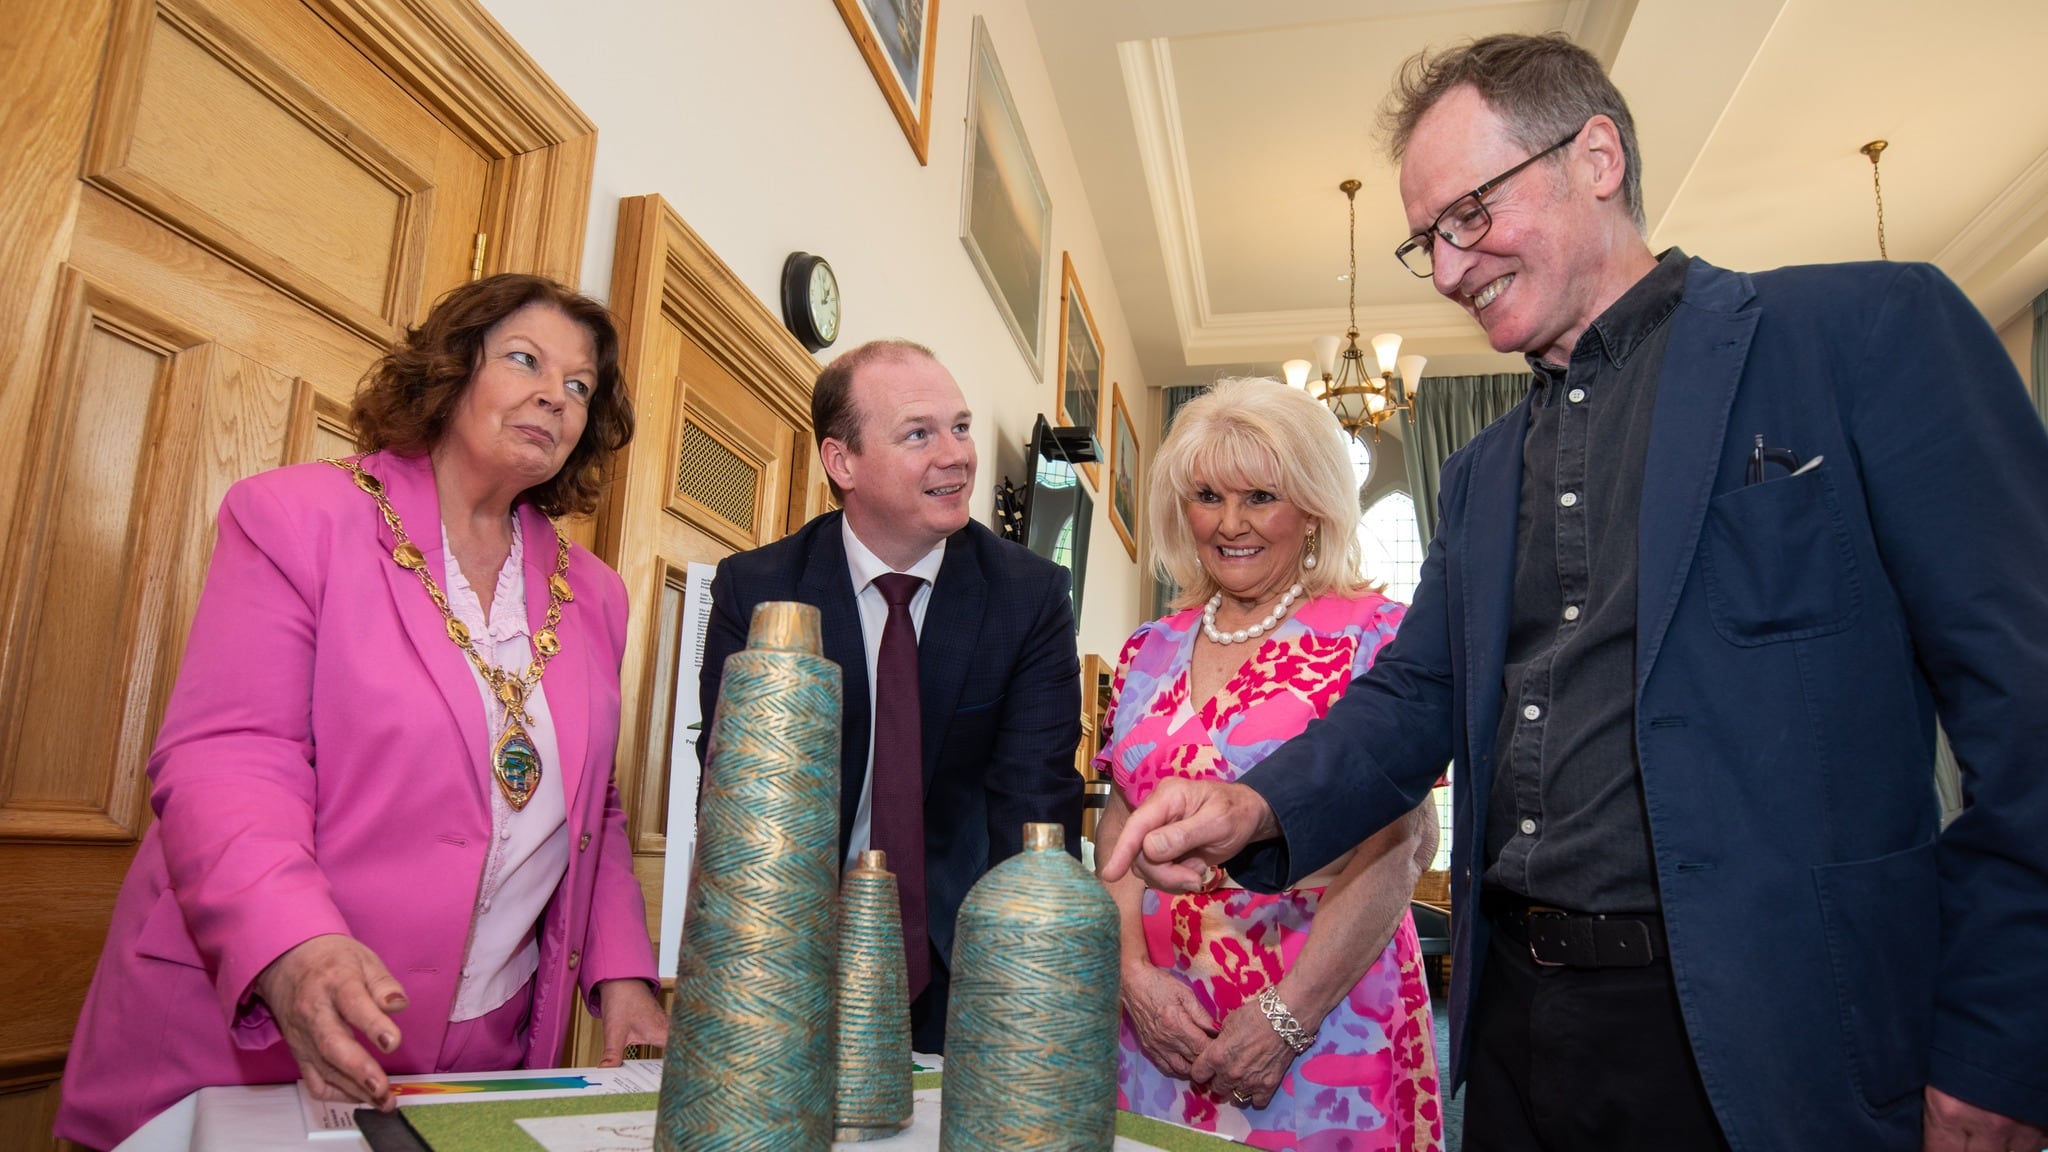 Former Communities Minister Gordon Lyons is pictured with (L-R) former Mayor of Derry City and Strabane District Council, Cllr Patricia Logue, Factory Girls representative Mary White and artist Chris Wilson, with the design of the Factory Girls' artwork.